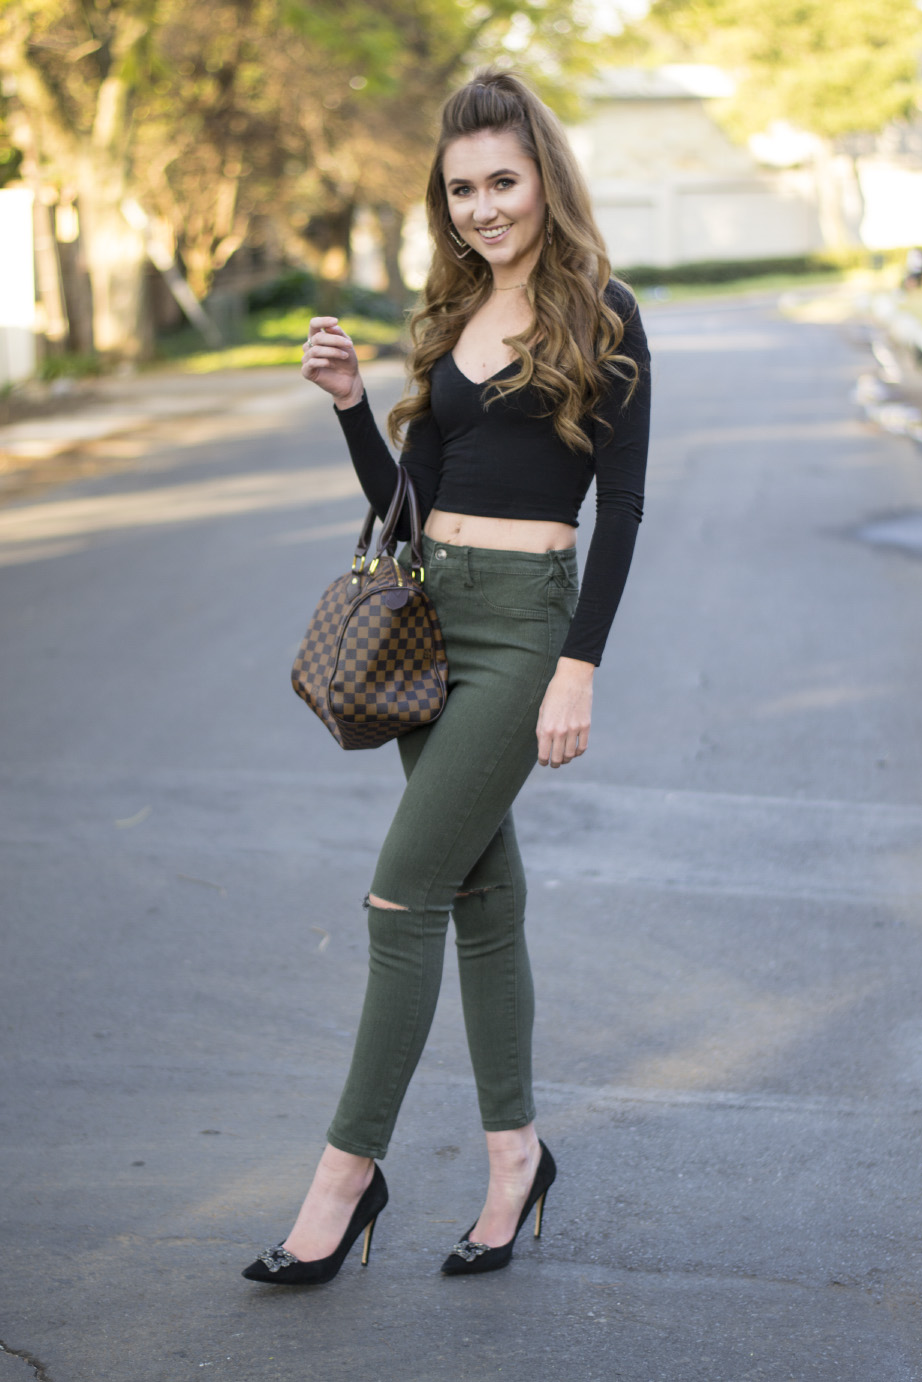 How to Style Crop Tops - Cute Crop Top Outfits Ideas